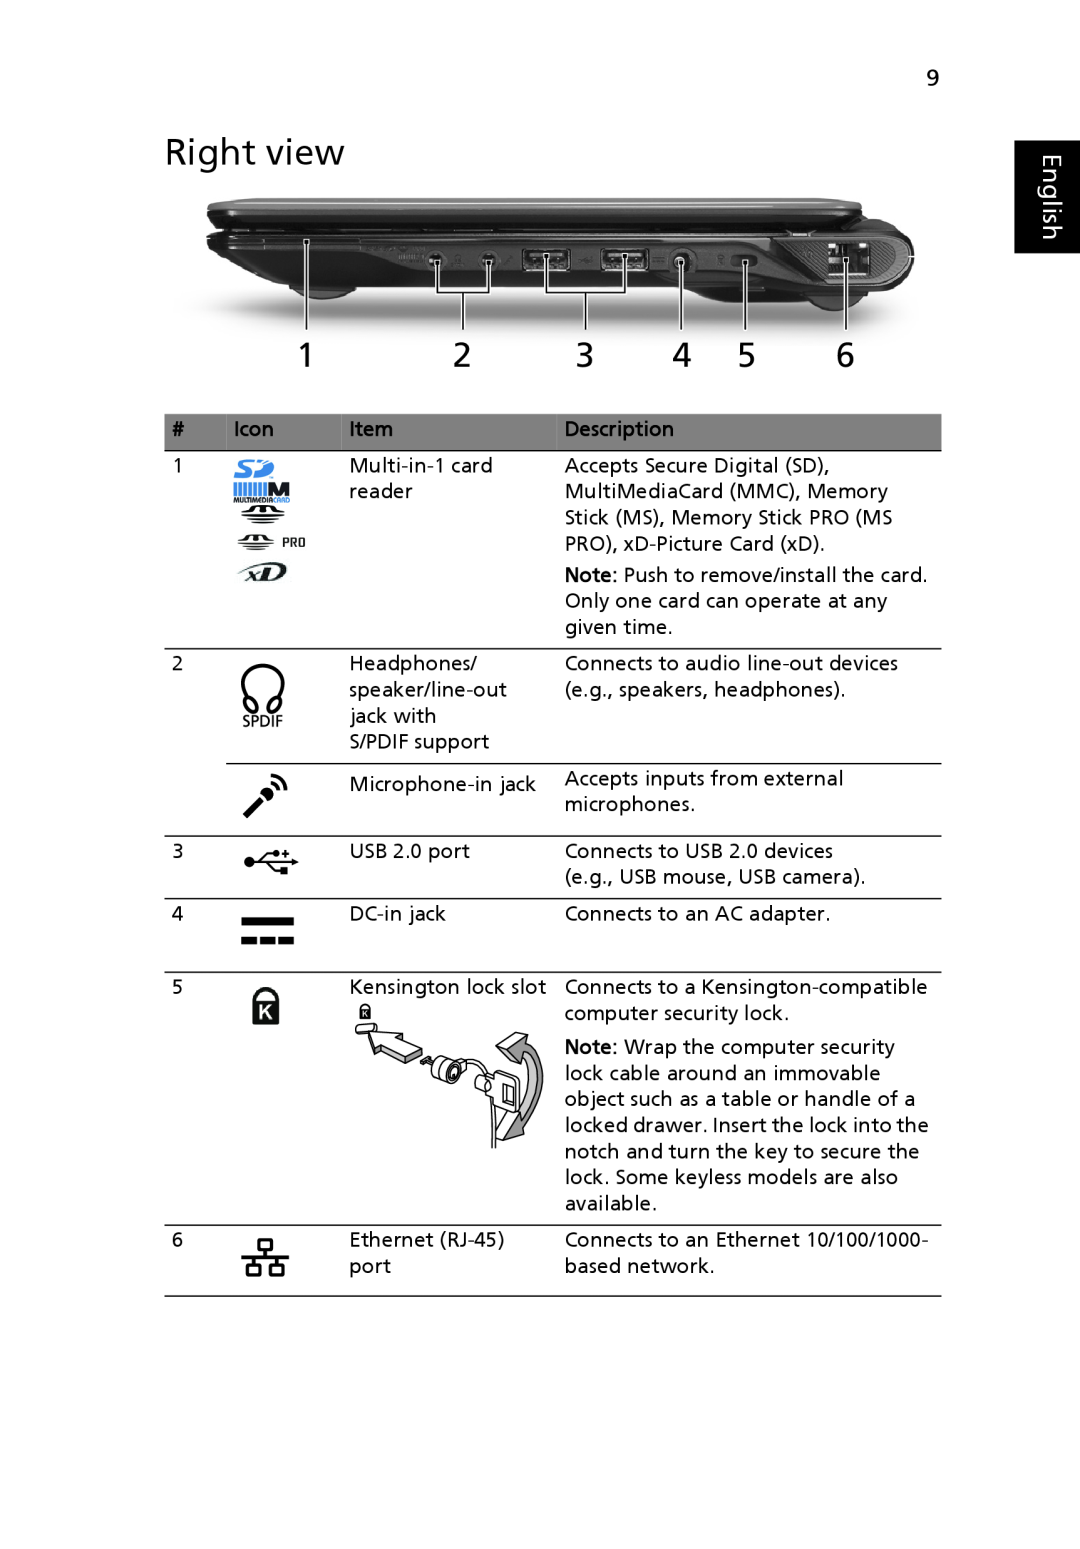 Acer 200 manual Right view, English, Icon, Description, Connects to USB 2.0 devices 